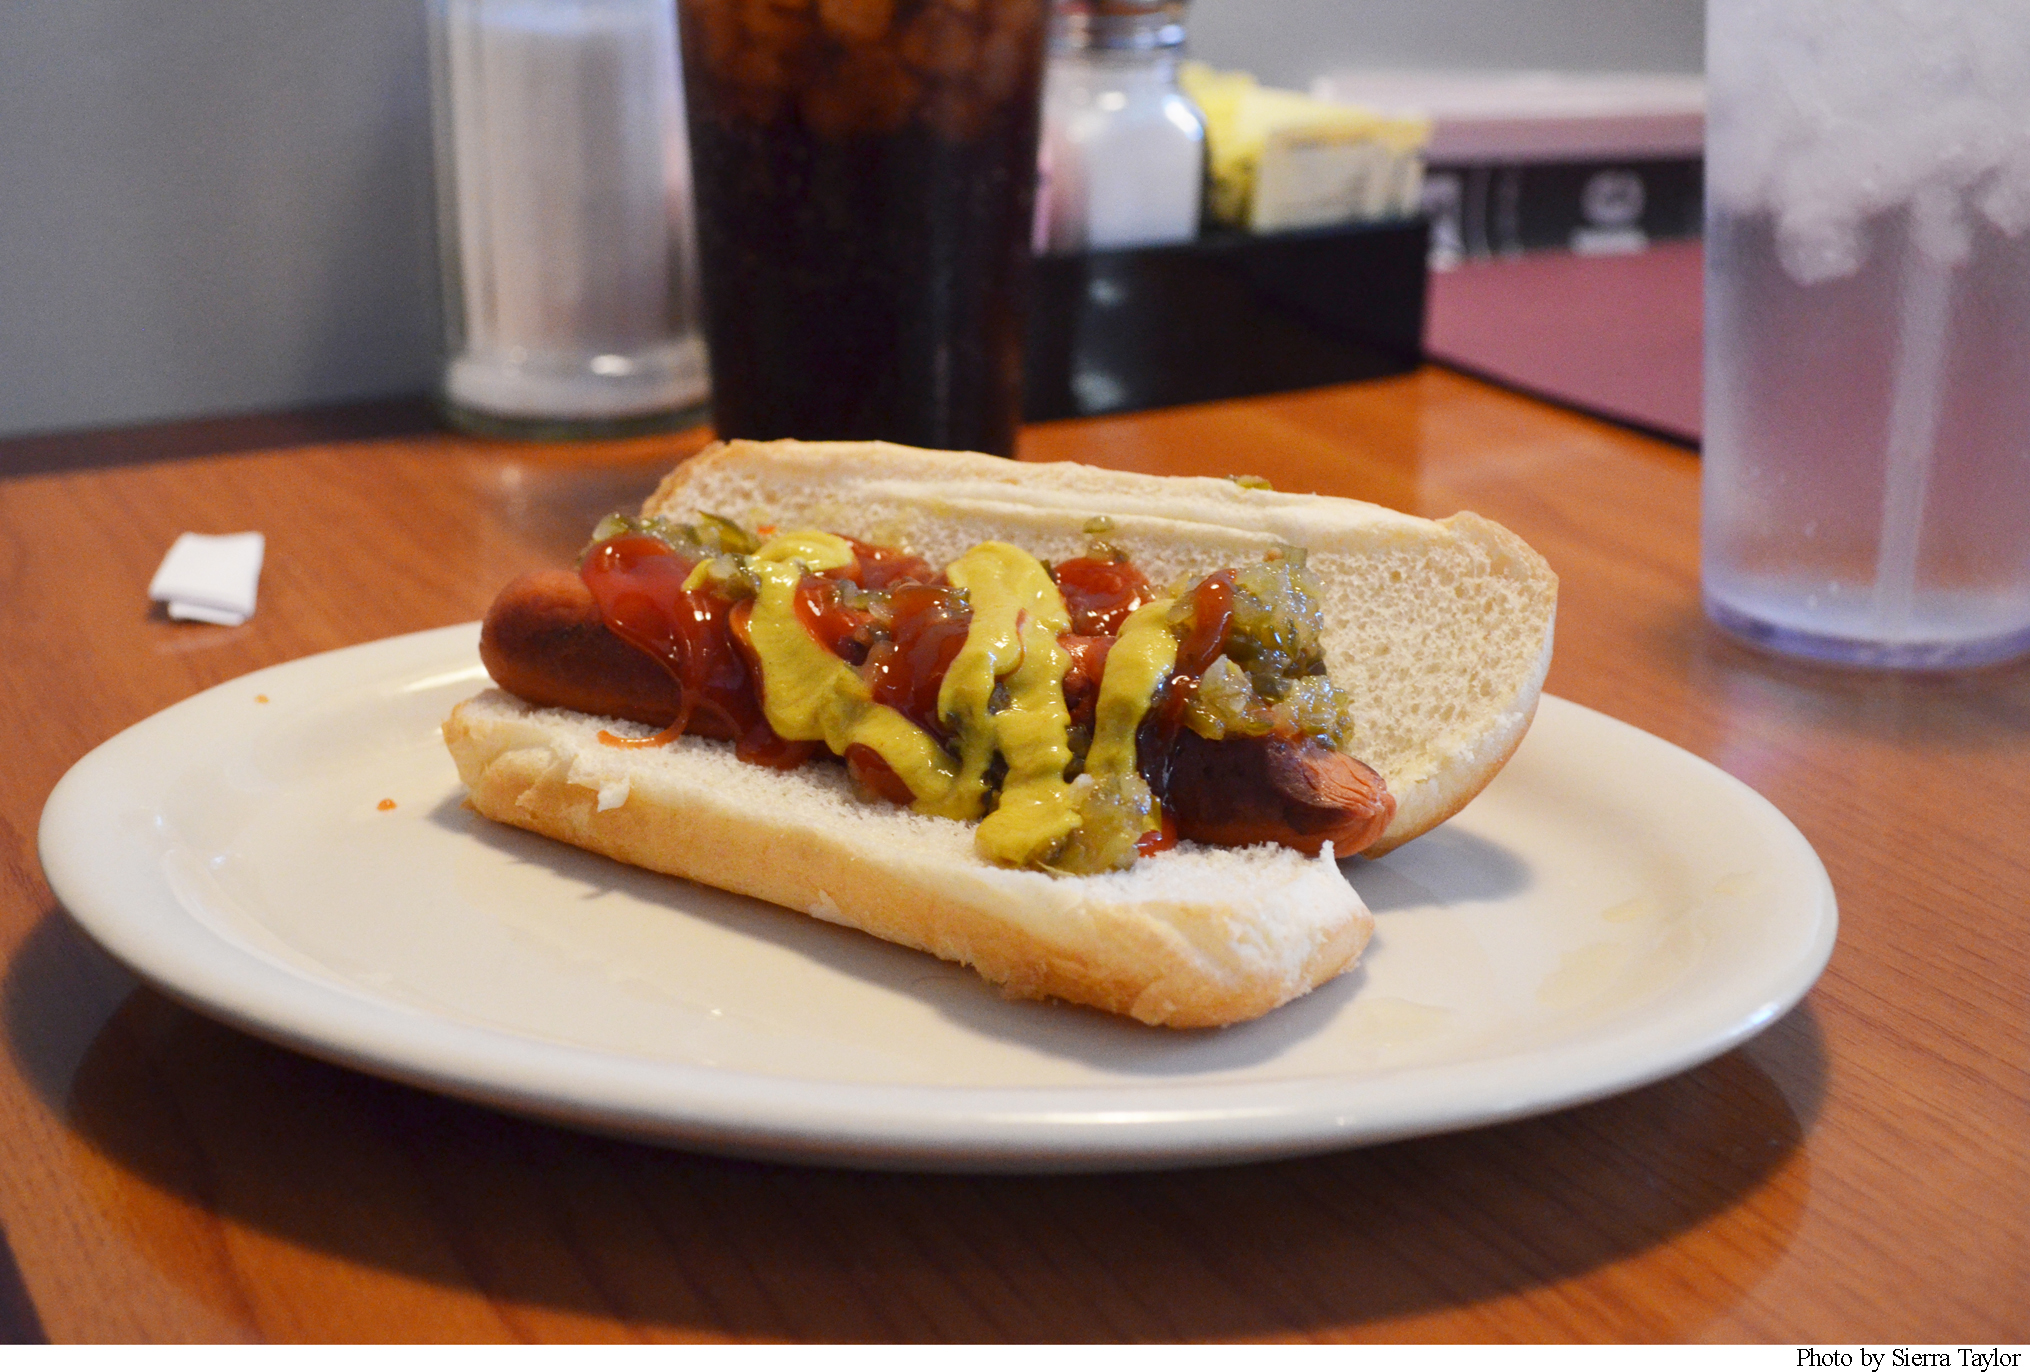 A Classic Hot Dog served with relish, ketchup and mustard is just one of the delicious All Angus Beef Coneys you can order at Dix.